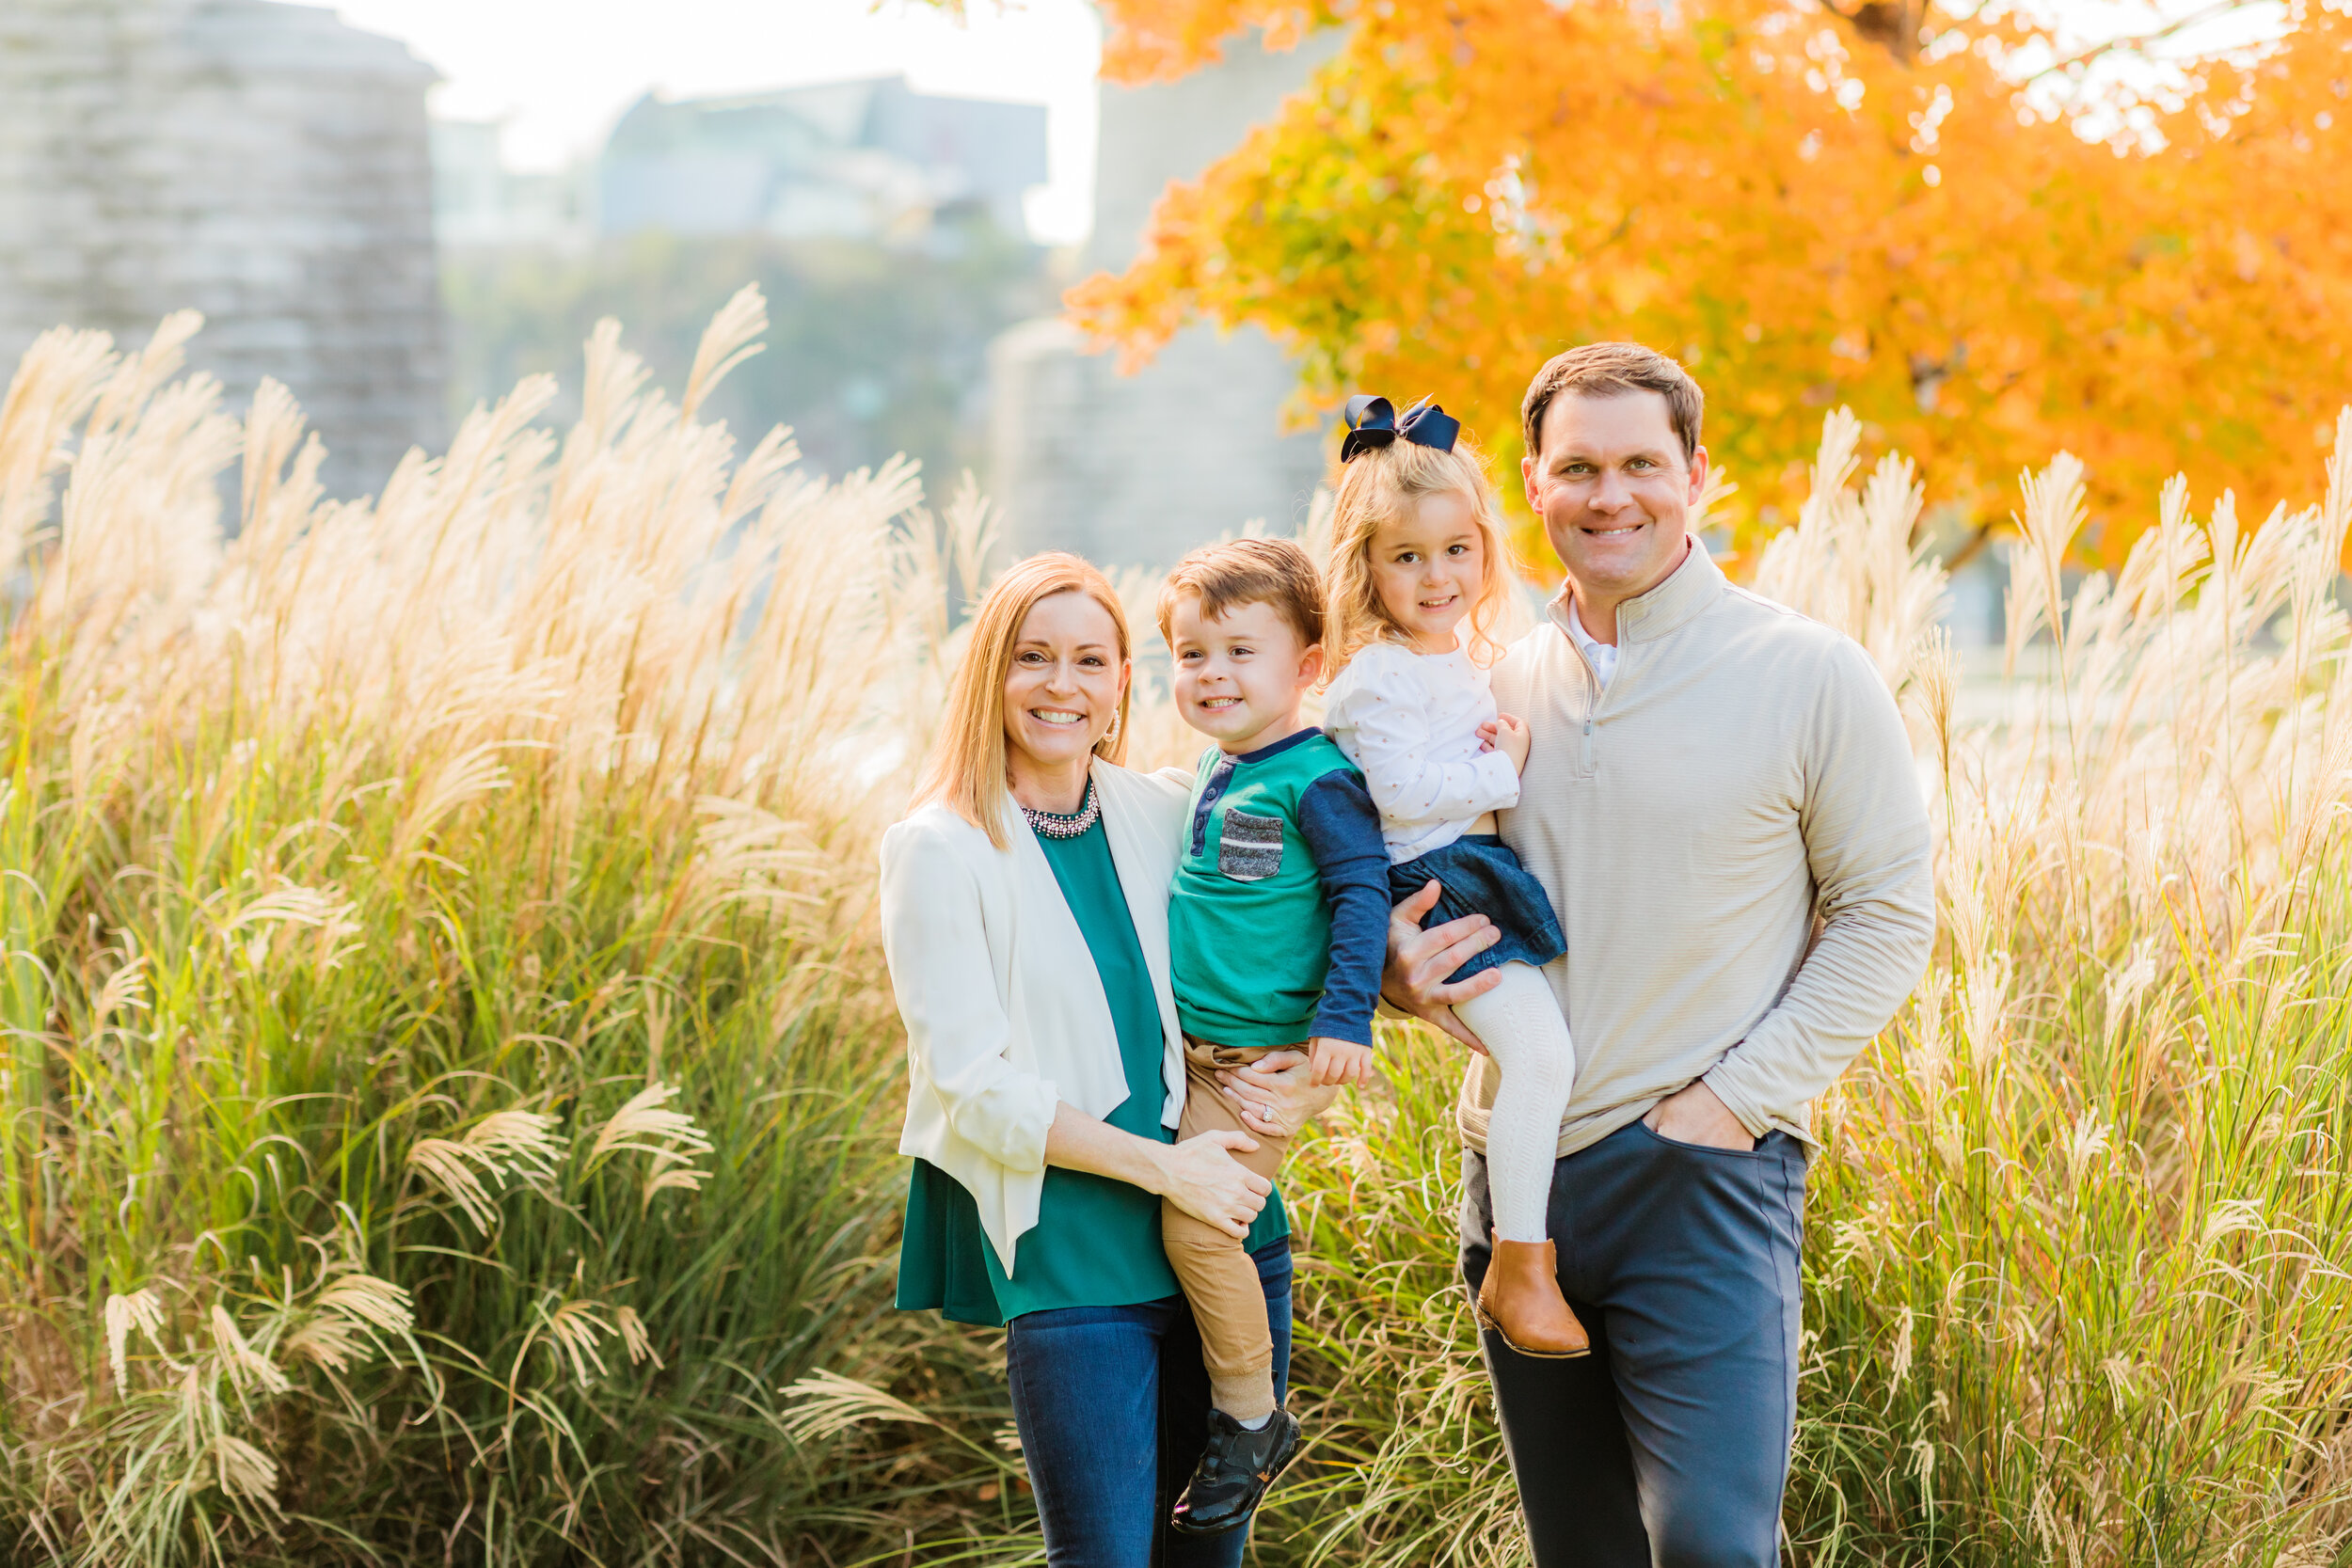 Family_Session_Coolidge_Park_Chattanooga_TN_Emily_Lester_Photography-81.jpg